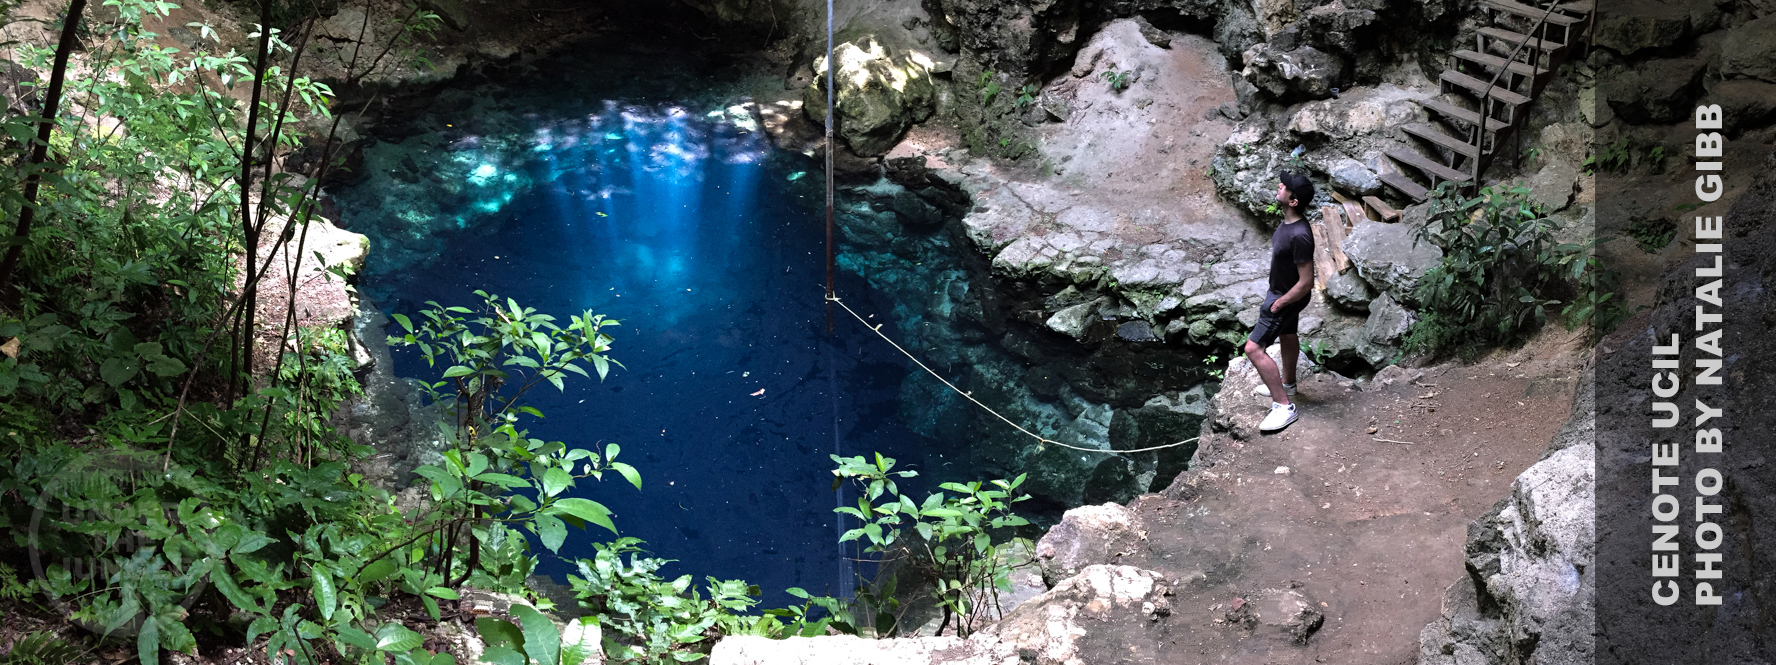 Cenote Ucil, Under the Jungle, Yucatan Diving, Cave Diving, Mexico Diving, Technical Diving